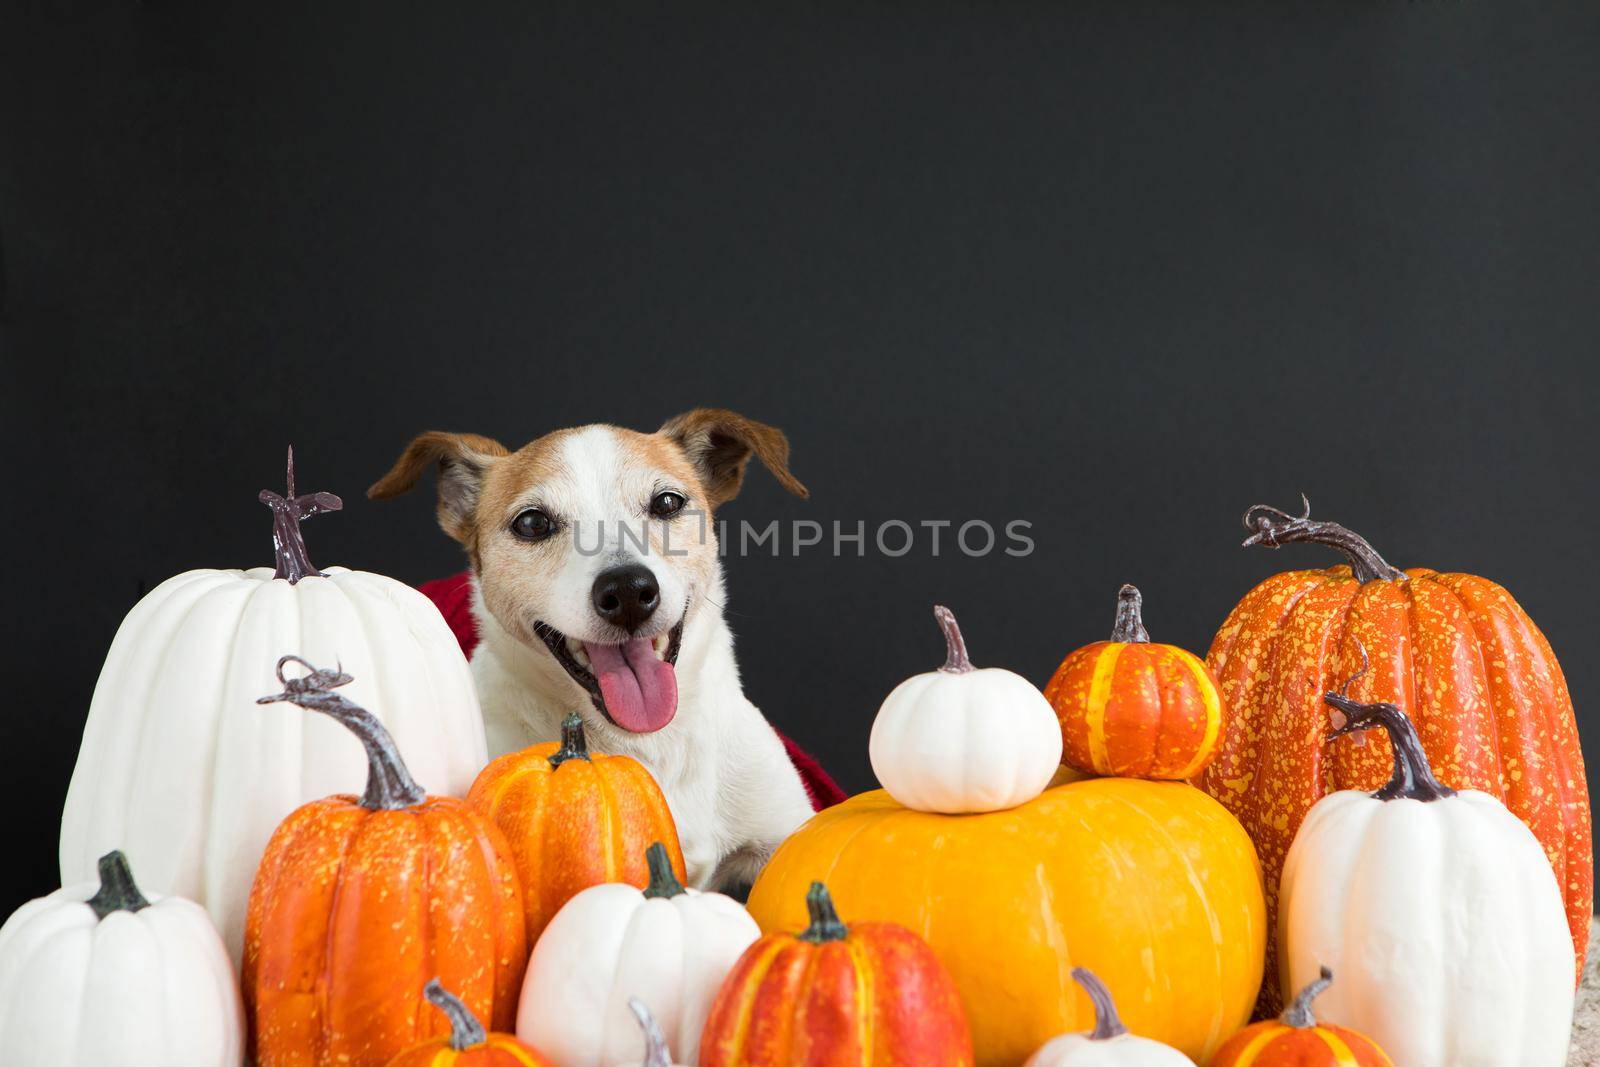 Adorable dog sitting amidst bunch of various pumpkins on Halloween day against black background